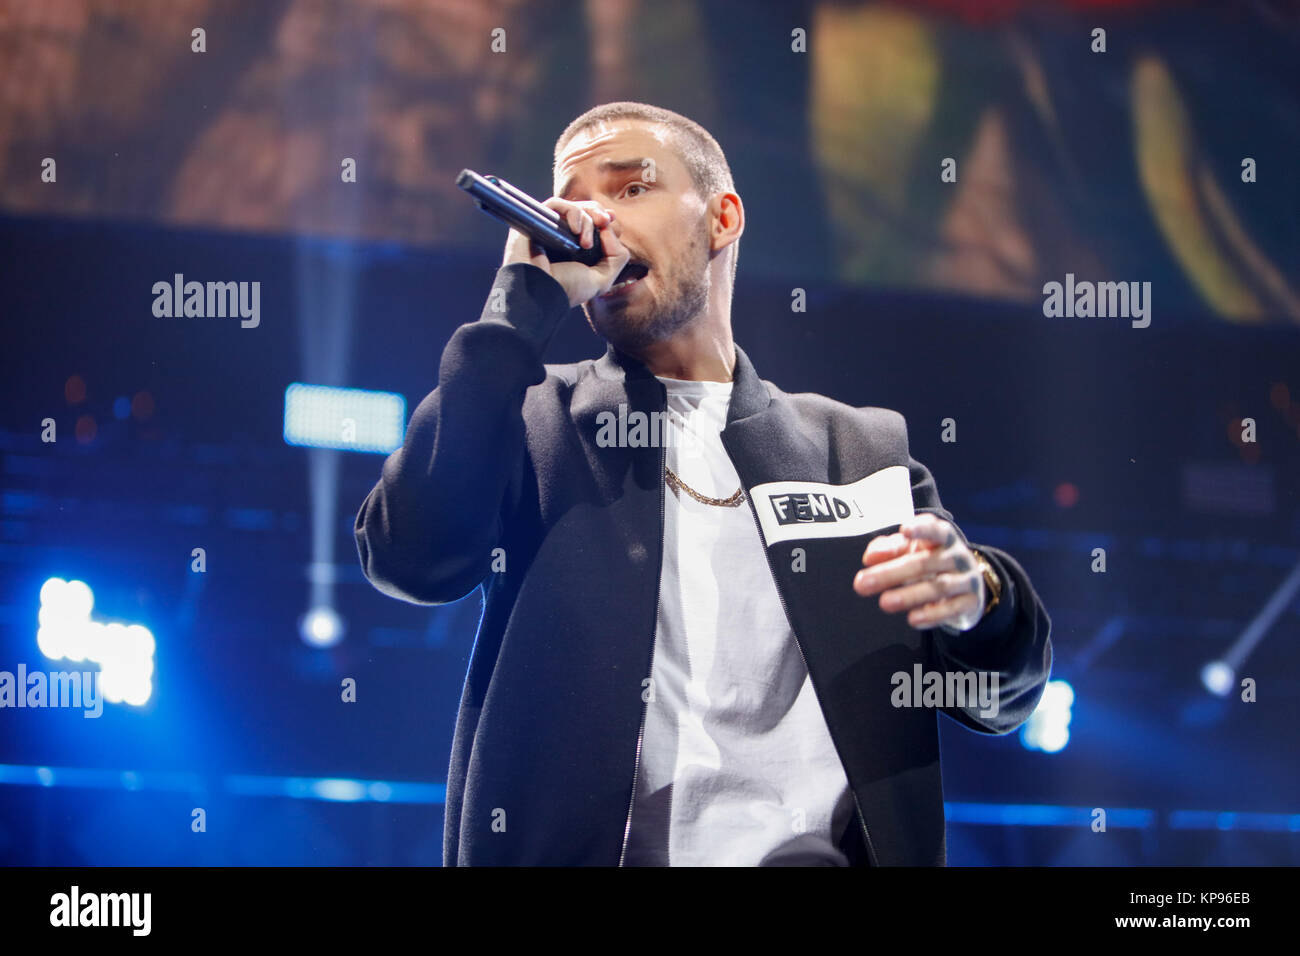 Liam Payne performs at the 99.5FM Jingle Ball presented by Capital One at the Capital One Center in Washington D.C. on 12/11/17 Stock Photo